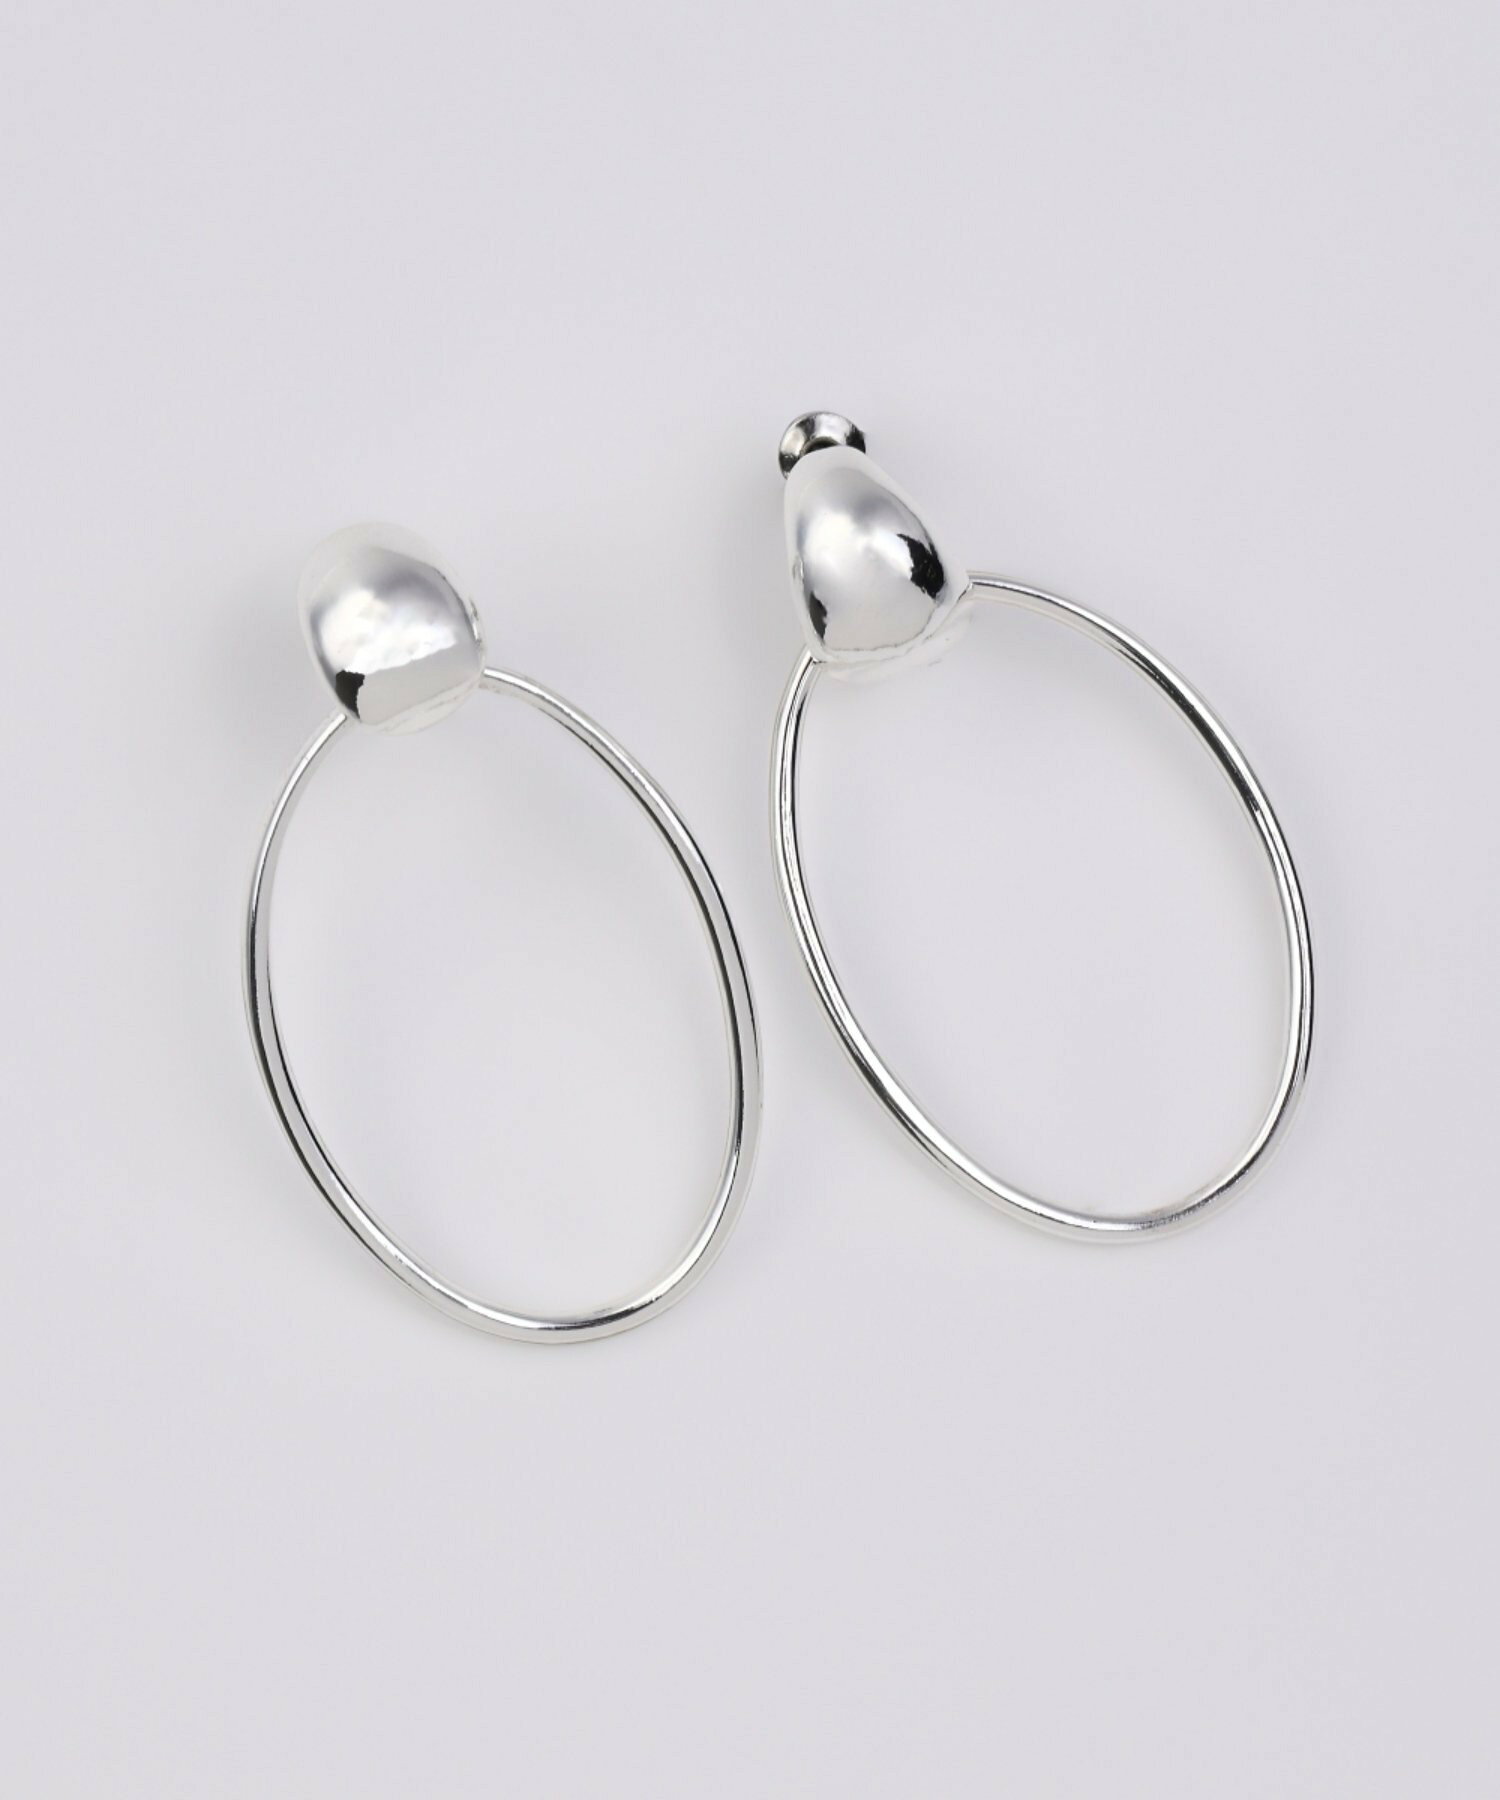 Nothing And Others/Ellipse Earring